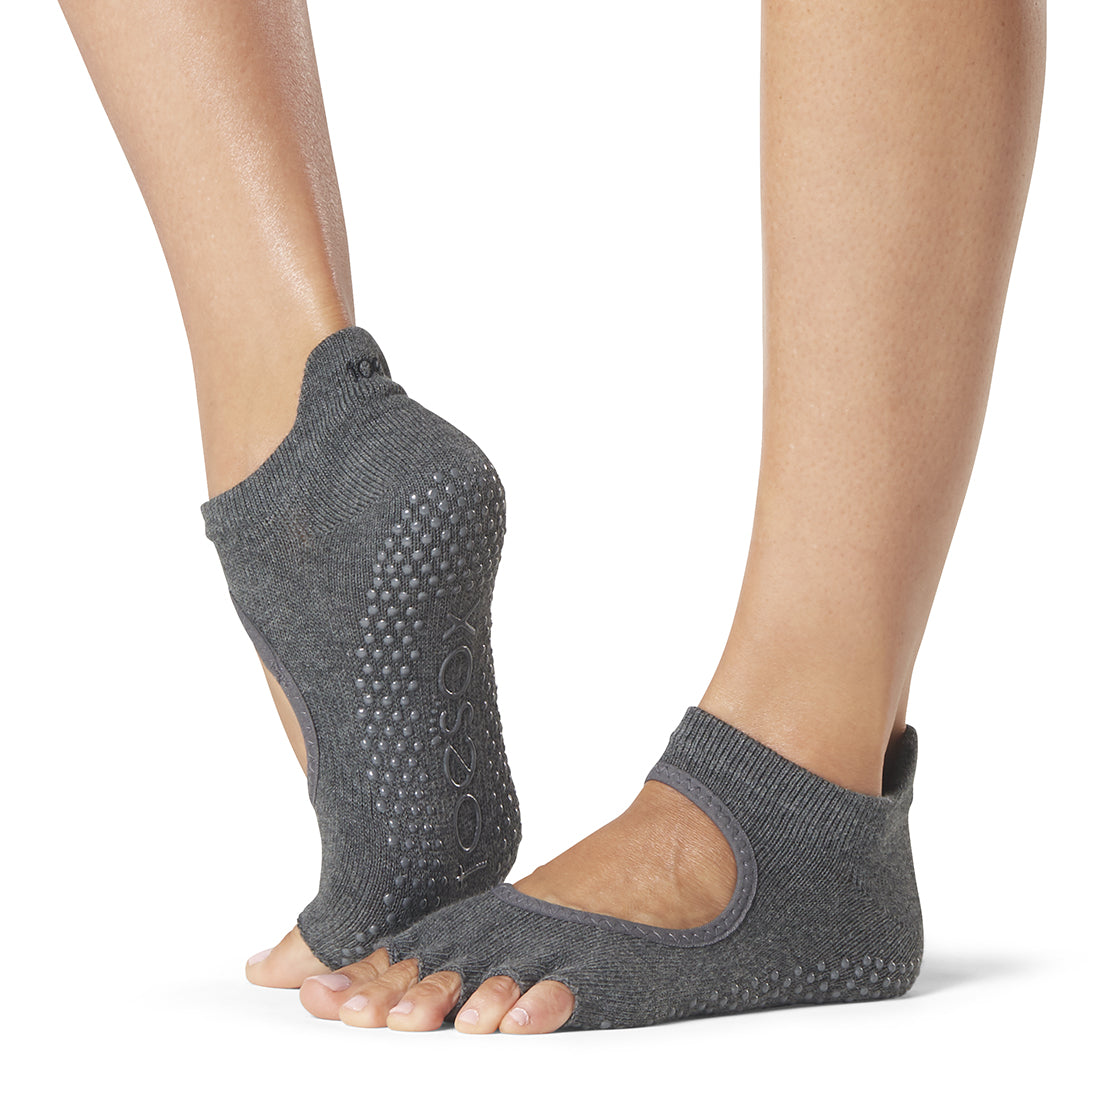 ToeSox Grip Socks in Hong Kong  T8 Fitness Tagged Grippy Socks. Non-slip  Socks - T8 Fitness - Asia Yoga, Pilates, Rehab, Fitness Products